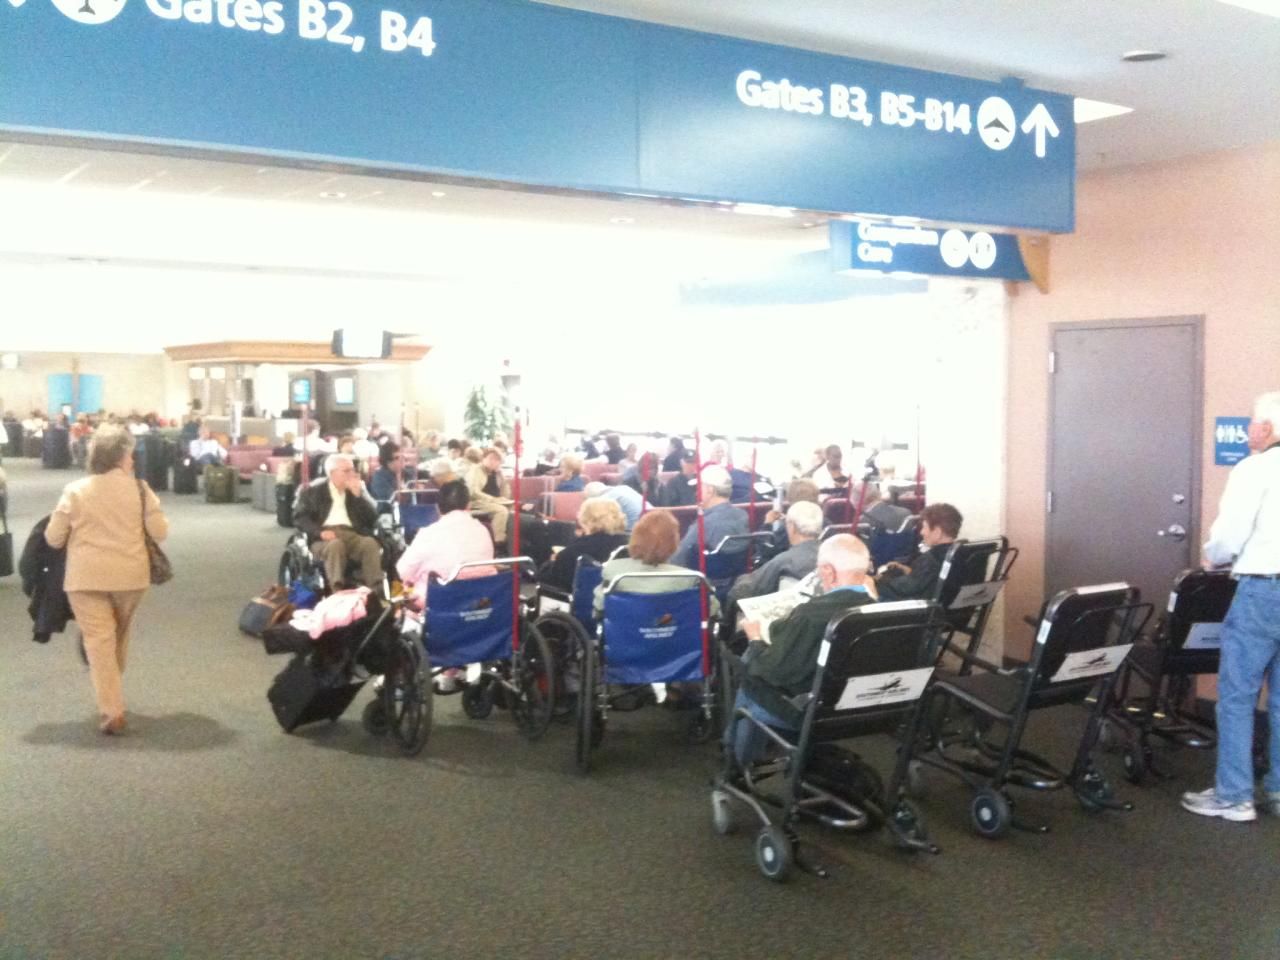 4466844371_125f940322_o - A lot of wheelchairs at a Southwest Airlines gate